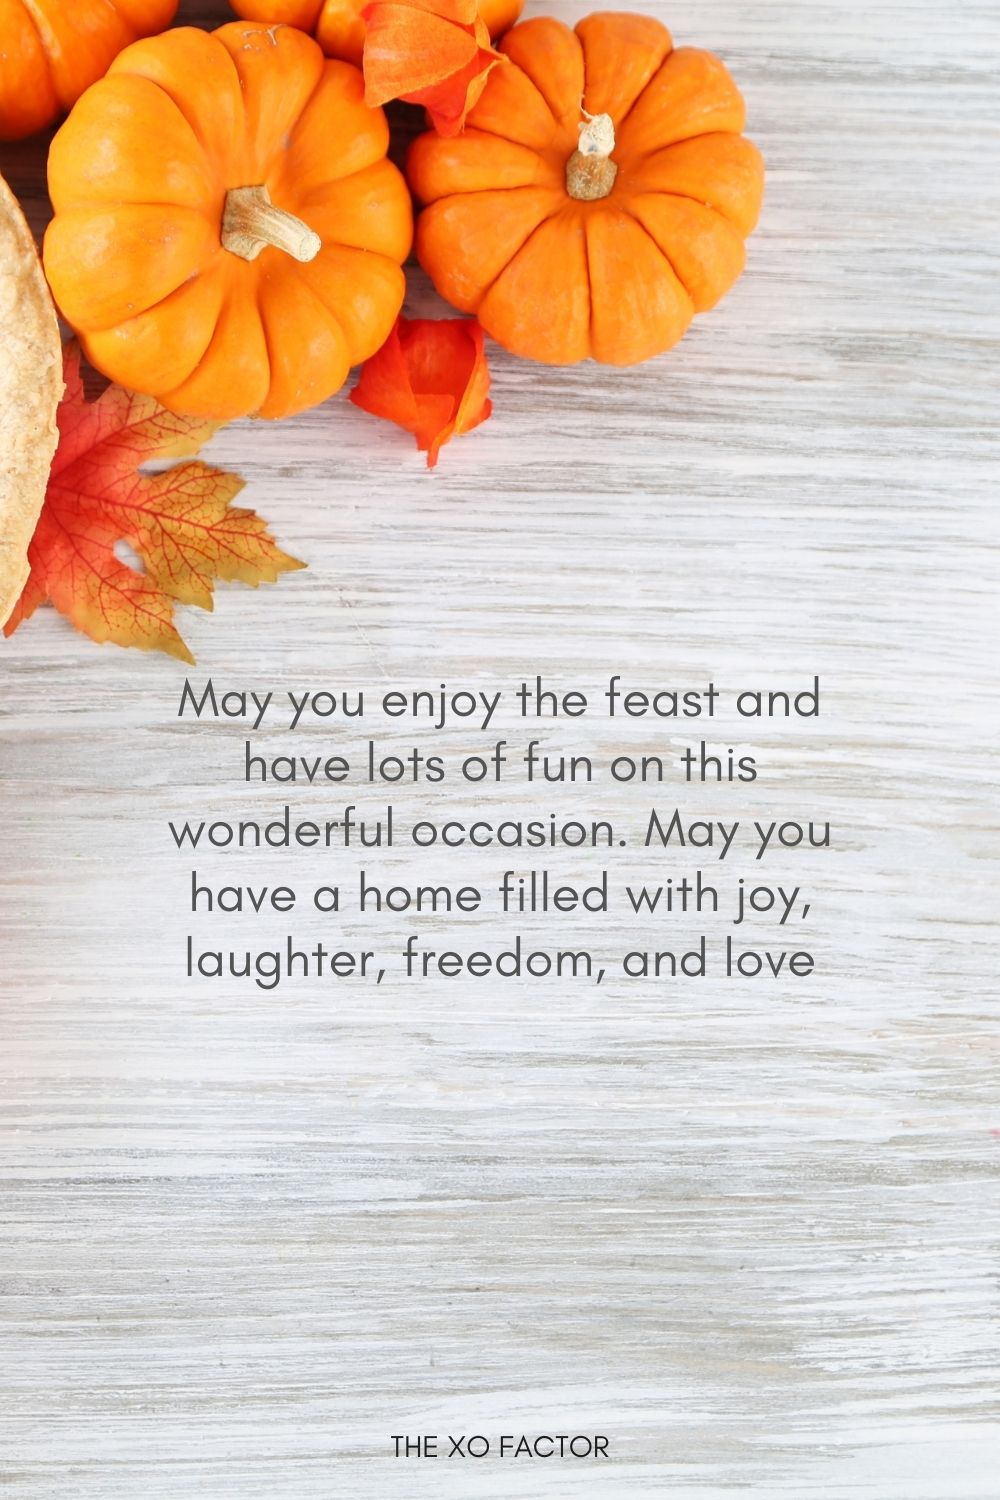 May you enjoy the feast and have lots of fun on this wonderful occasion. May you have a home filled with joy, laughter, freedom, and love. Happy Thanksgiving.